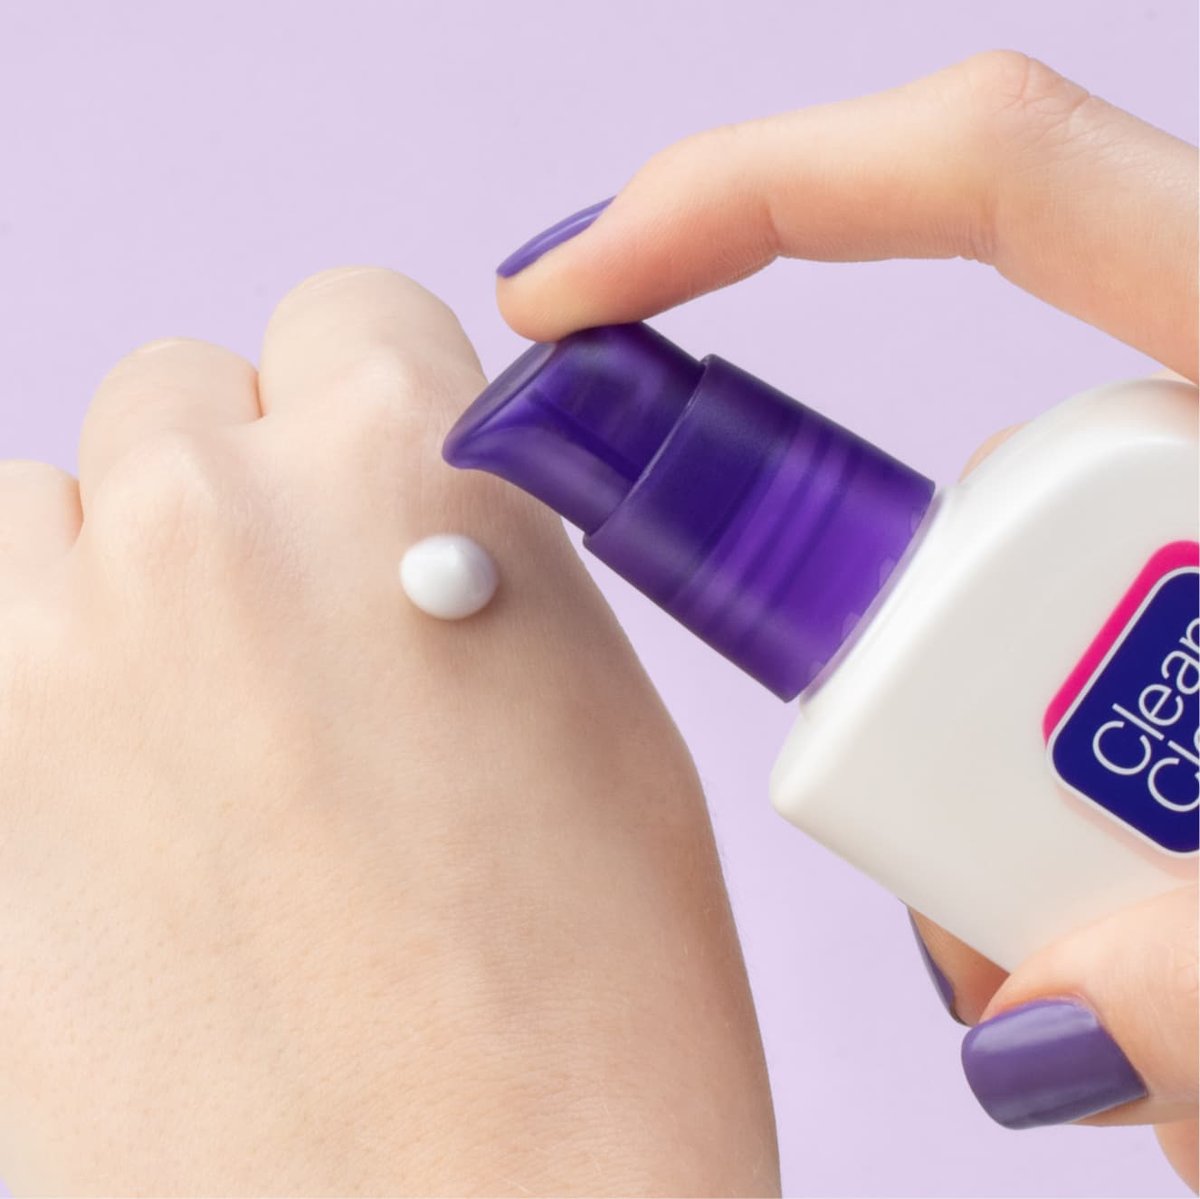 Hand with purple nails pumps Clean & Clear dual action moisturizer on back of fist